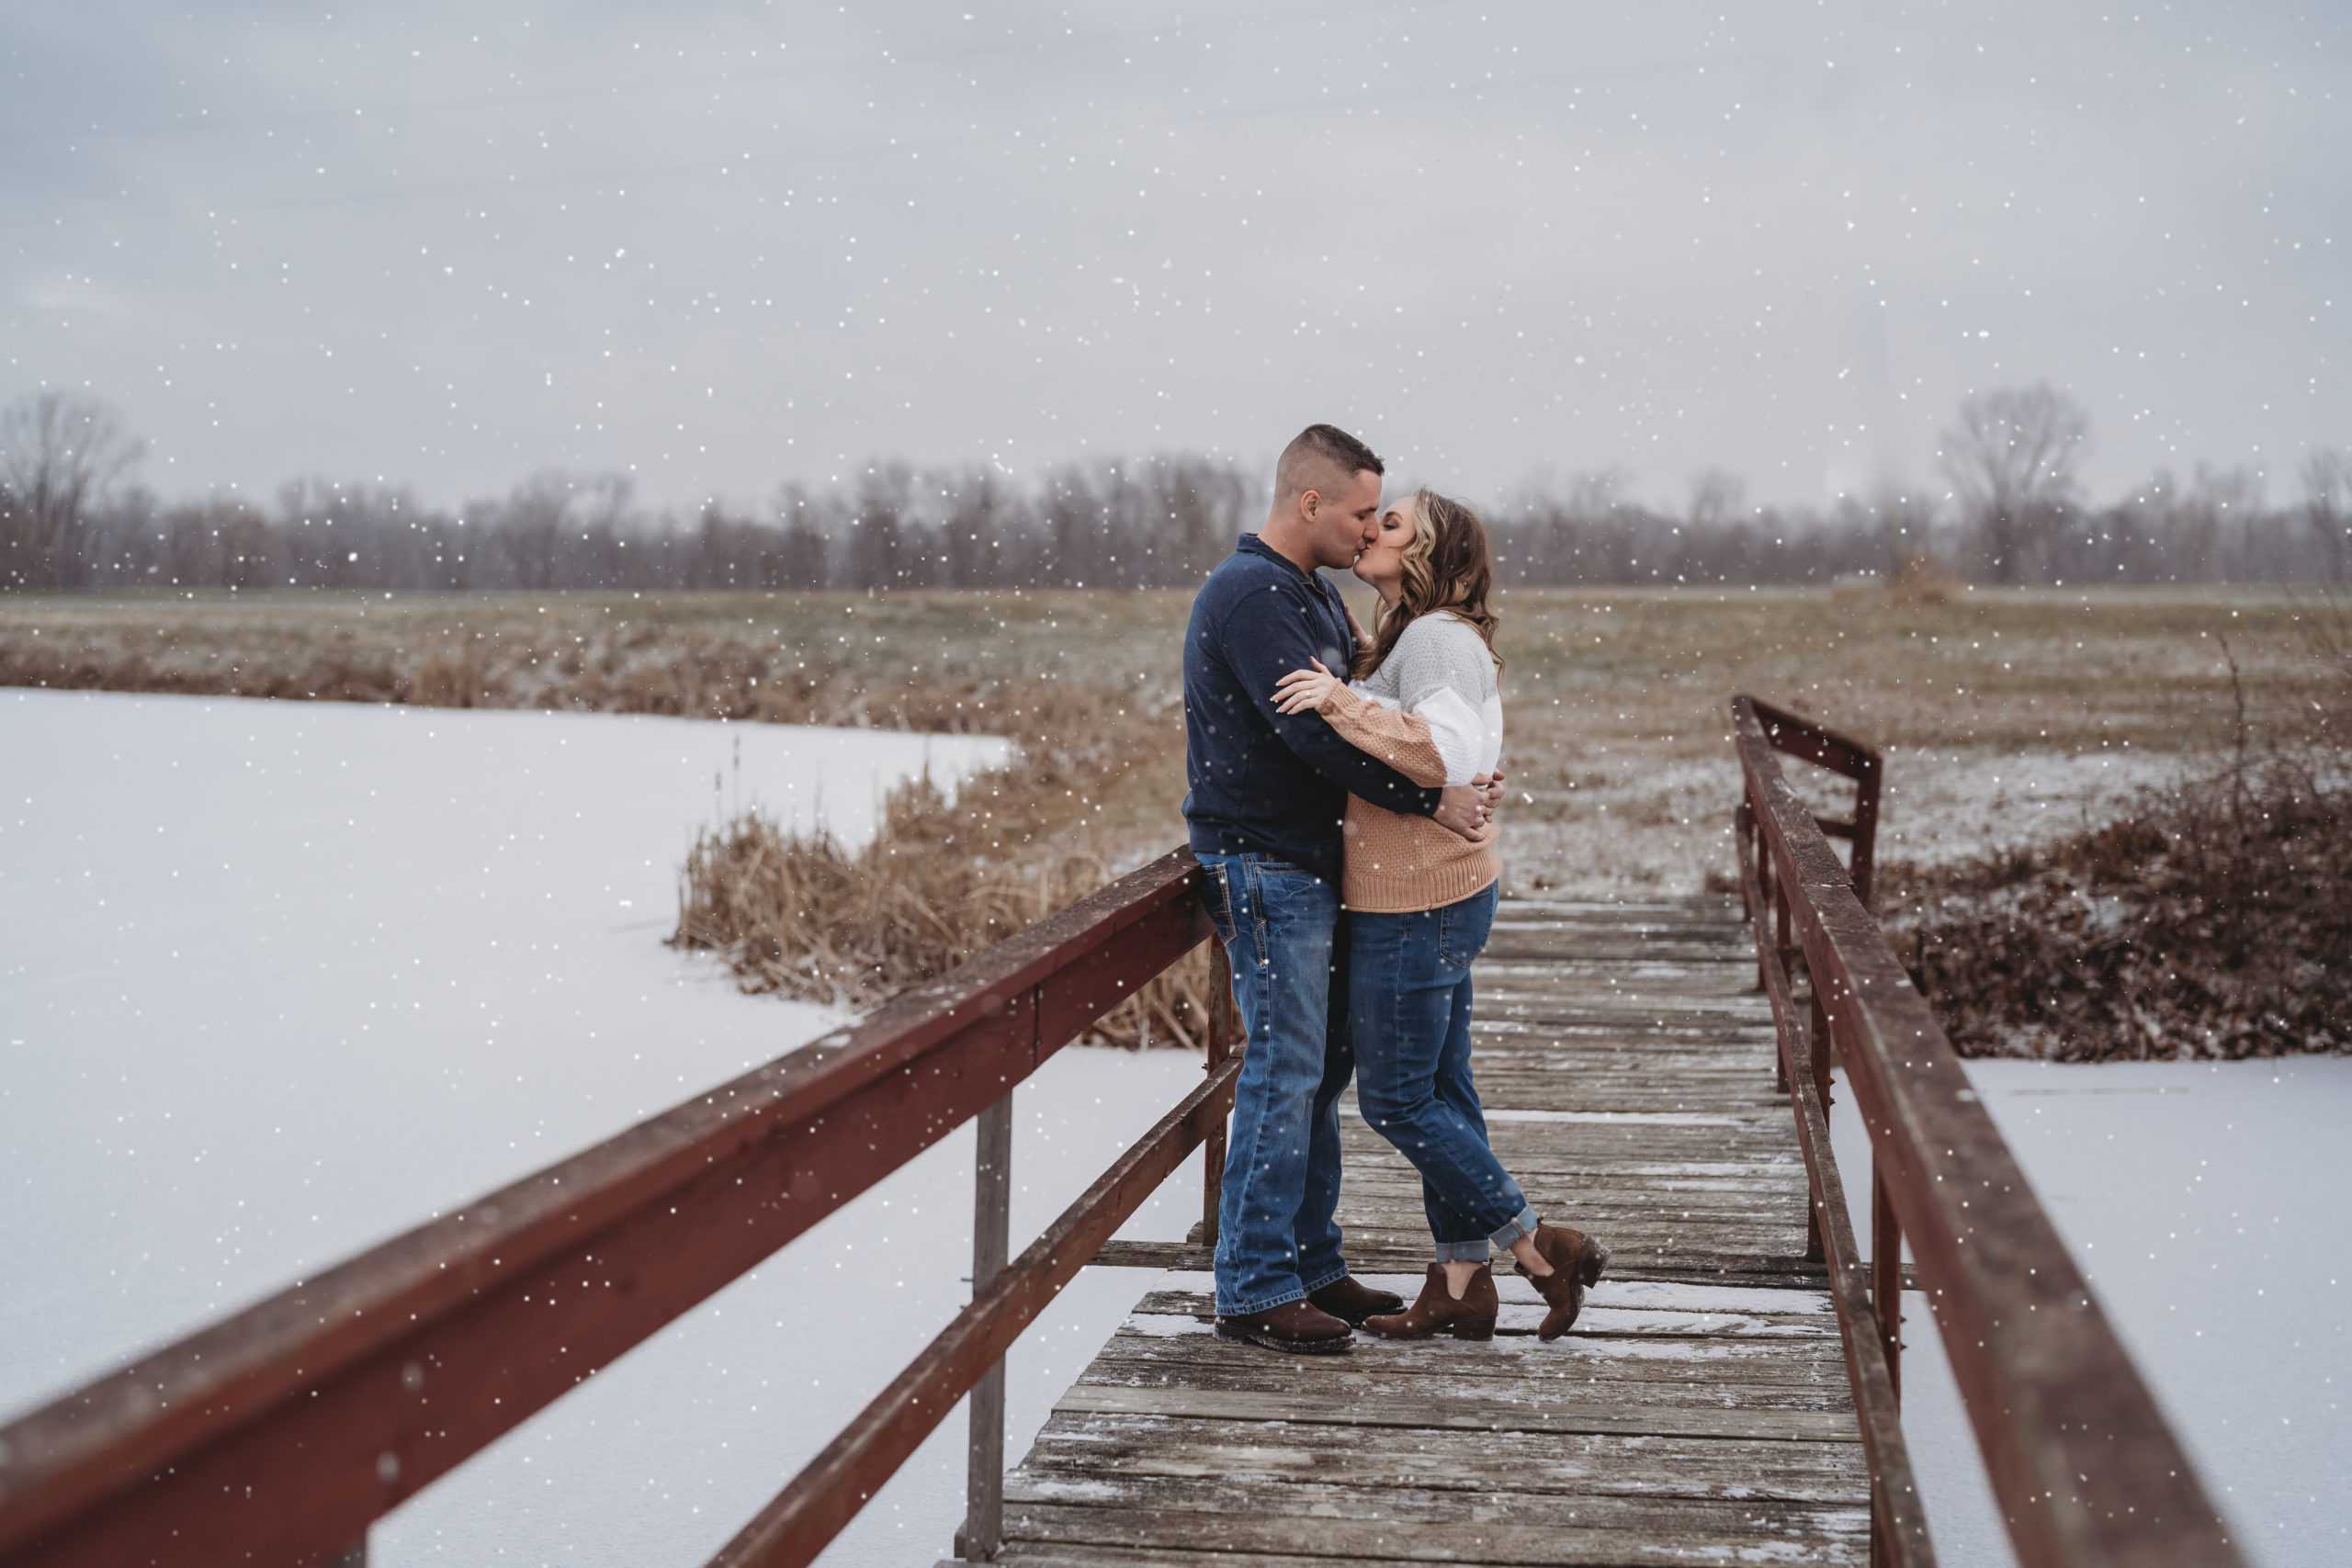 Newly engagement couple embraces one another on bridge over a snow covered pond